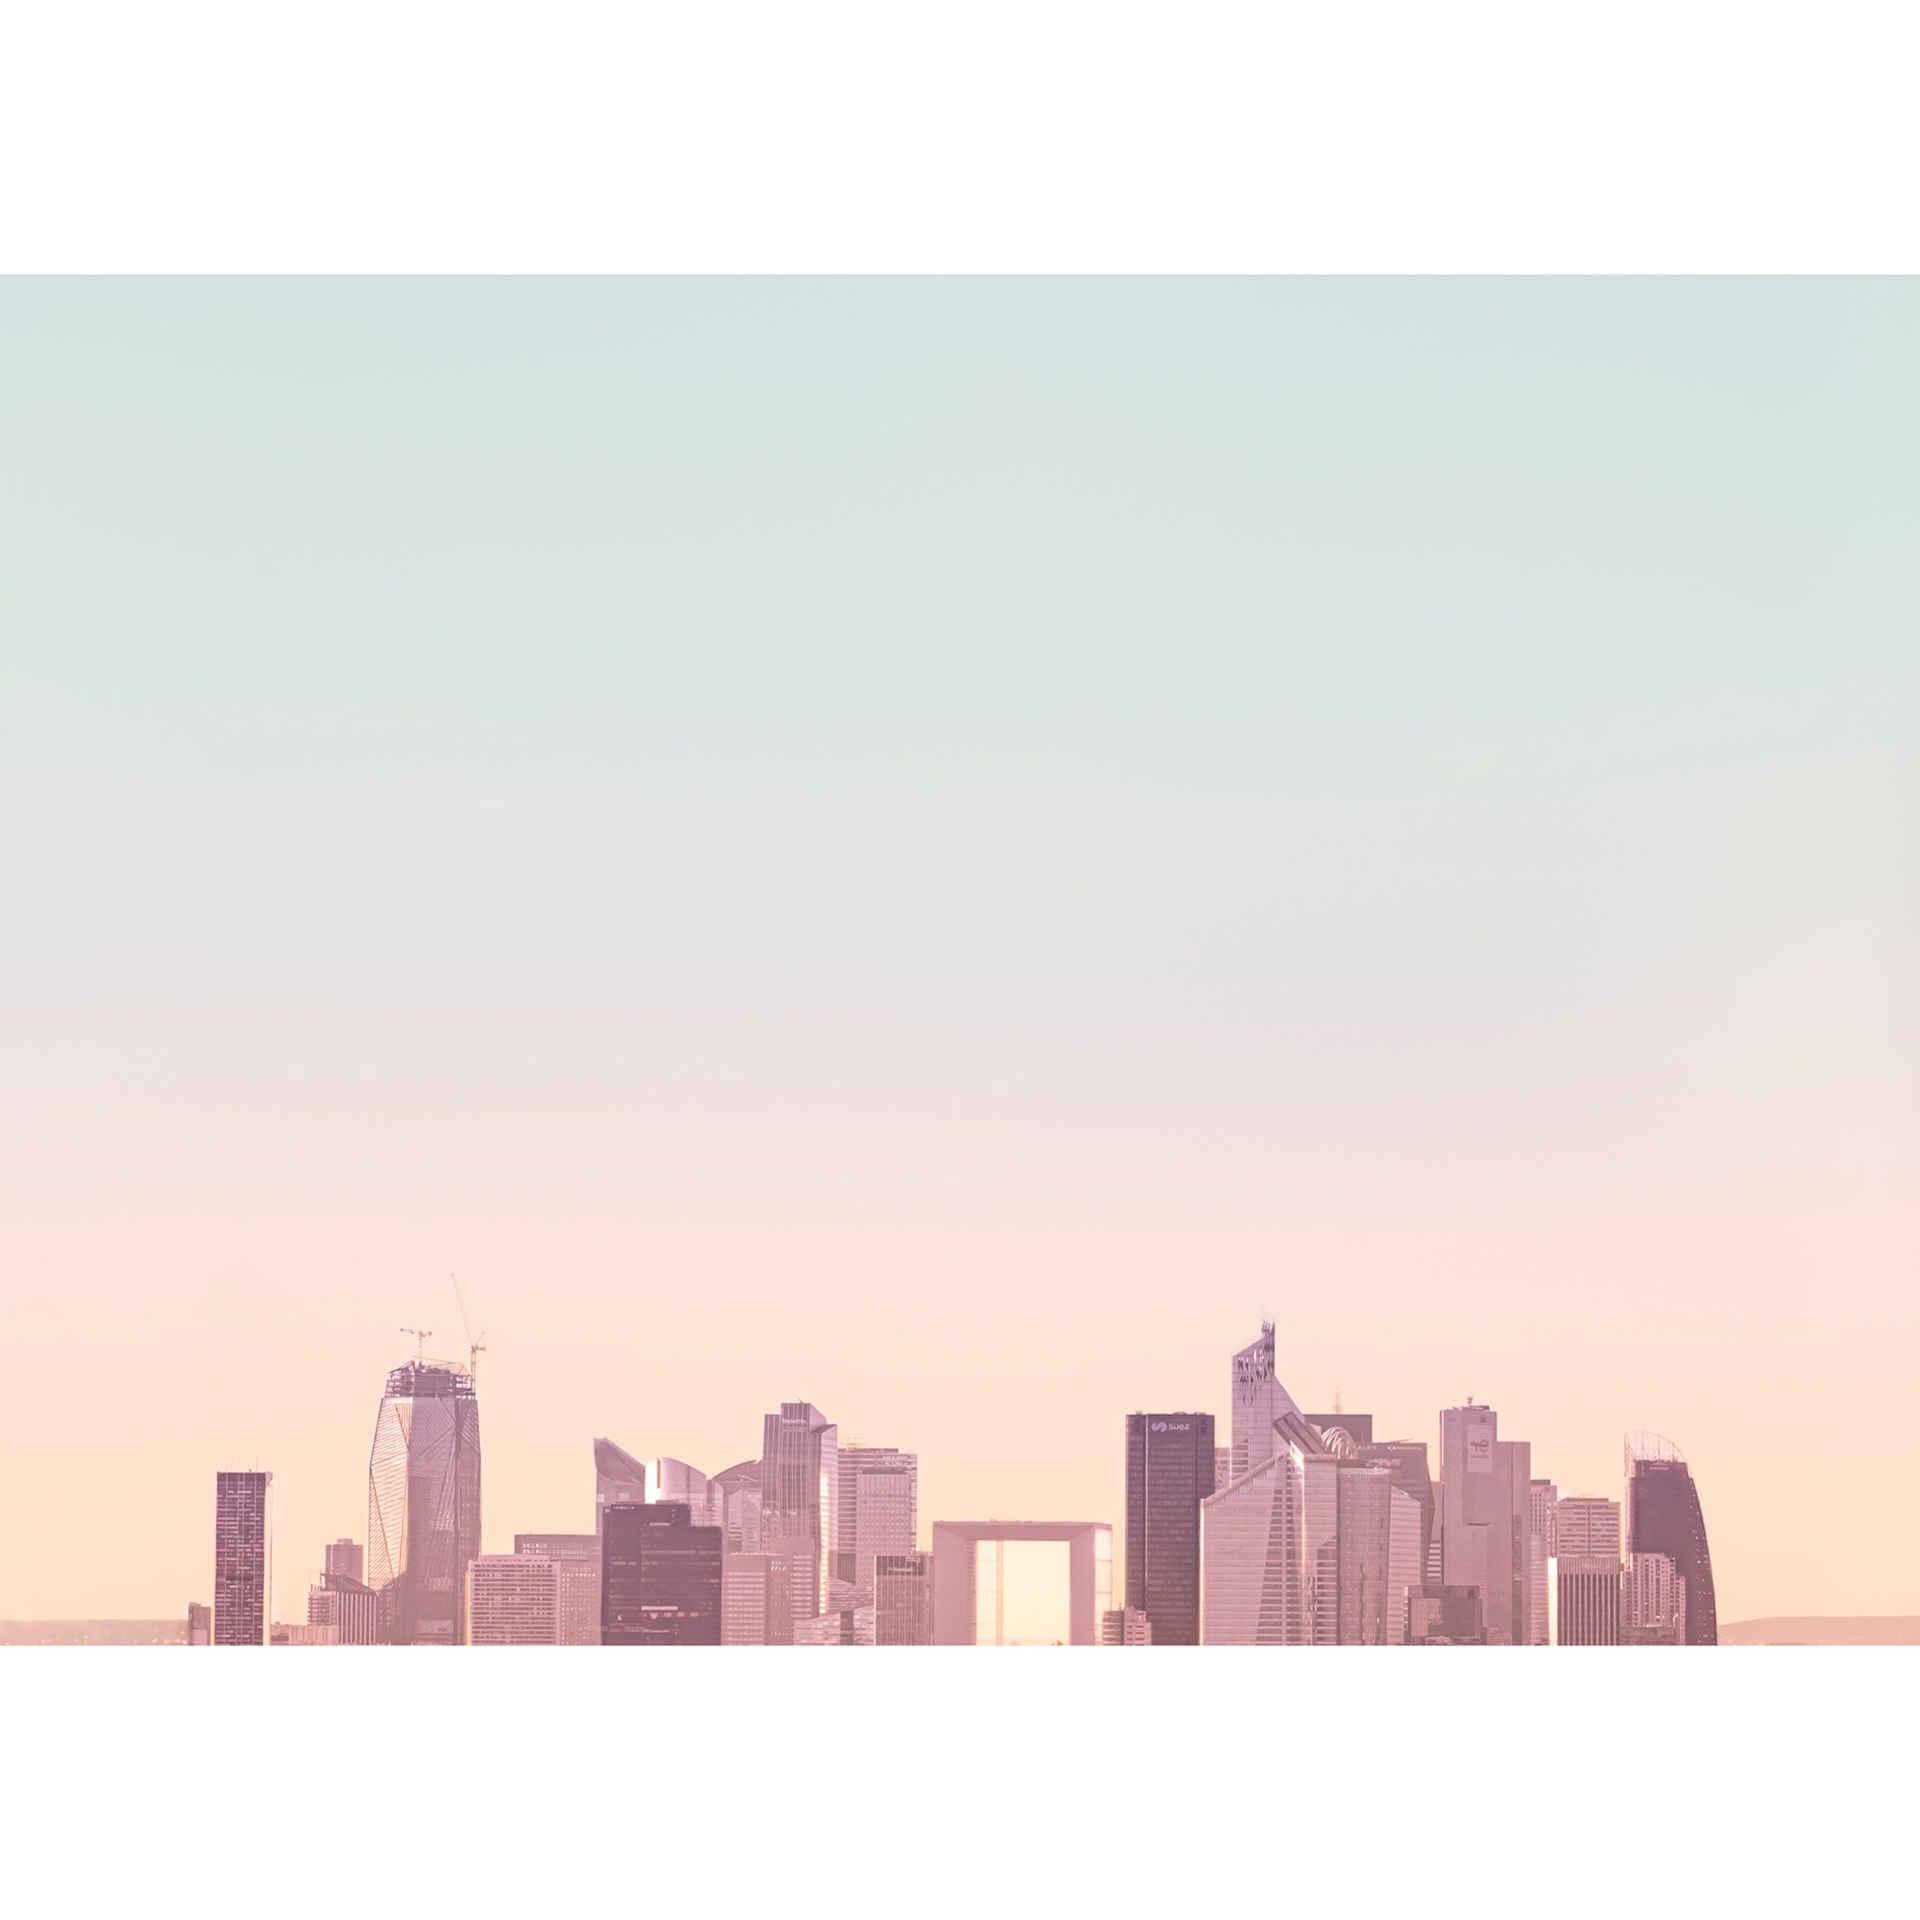 Panoramic skyline in Paris. Minimal photograph with soft and warm sunset colors that invites you to see Paris from a different perspective.